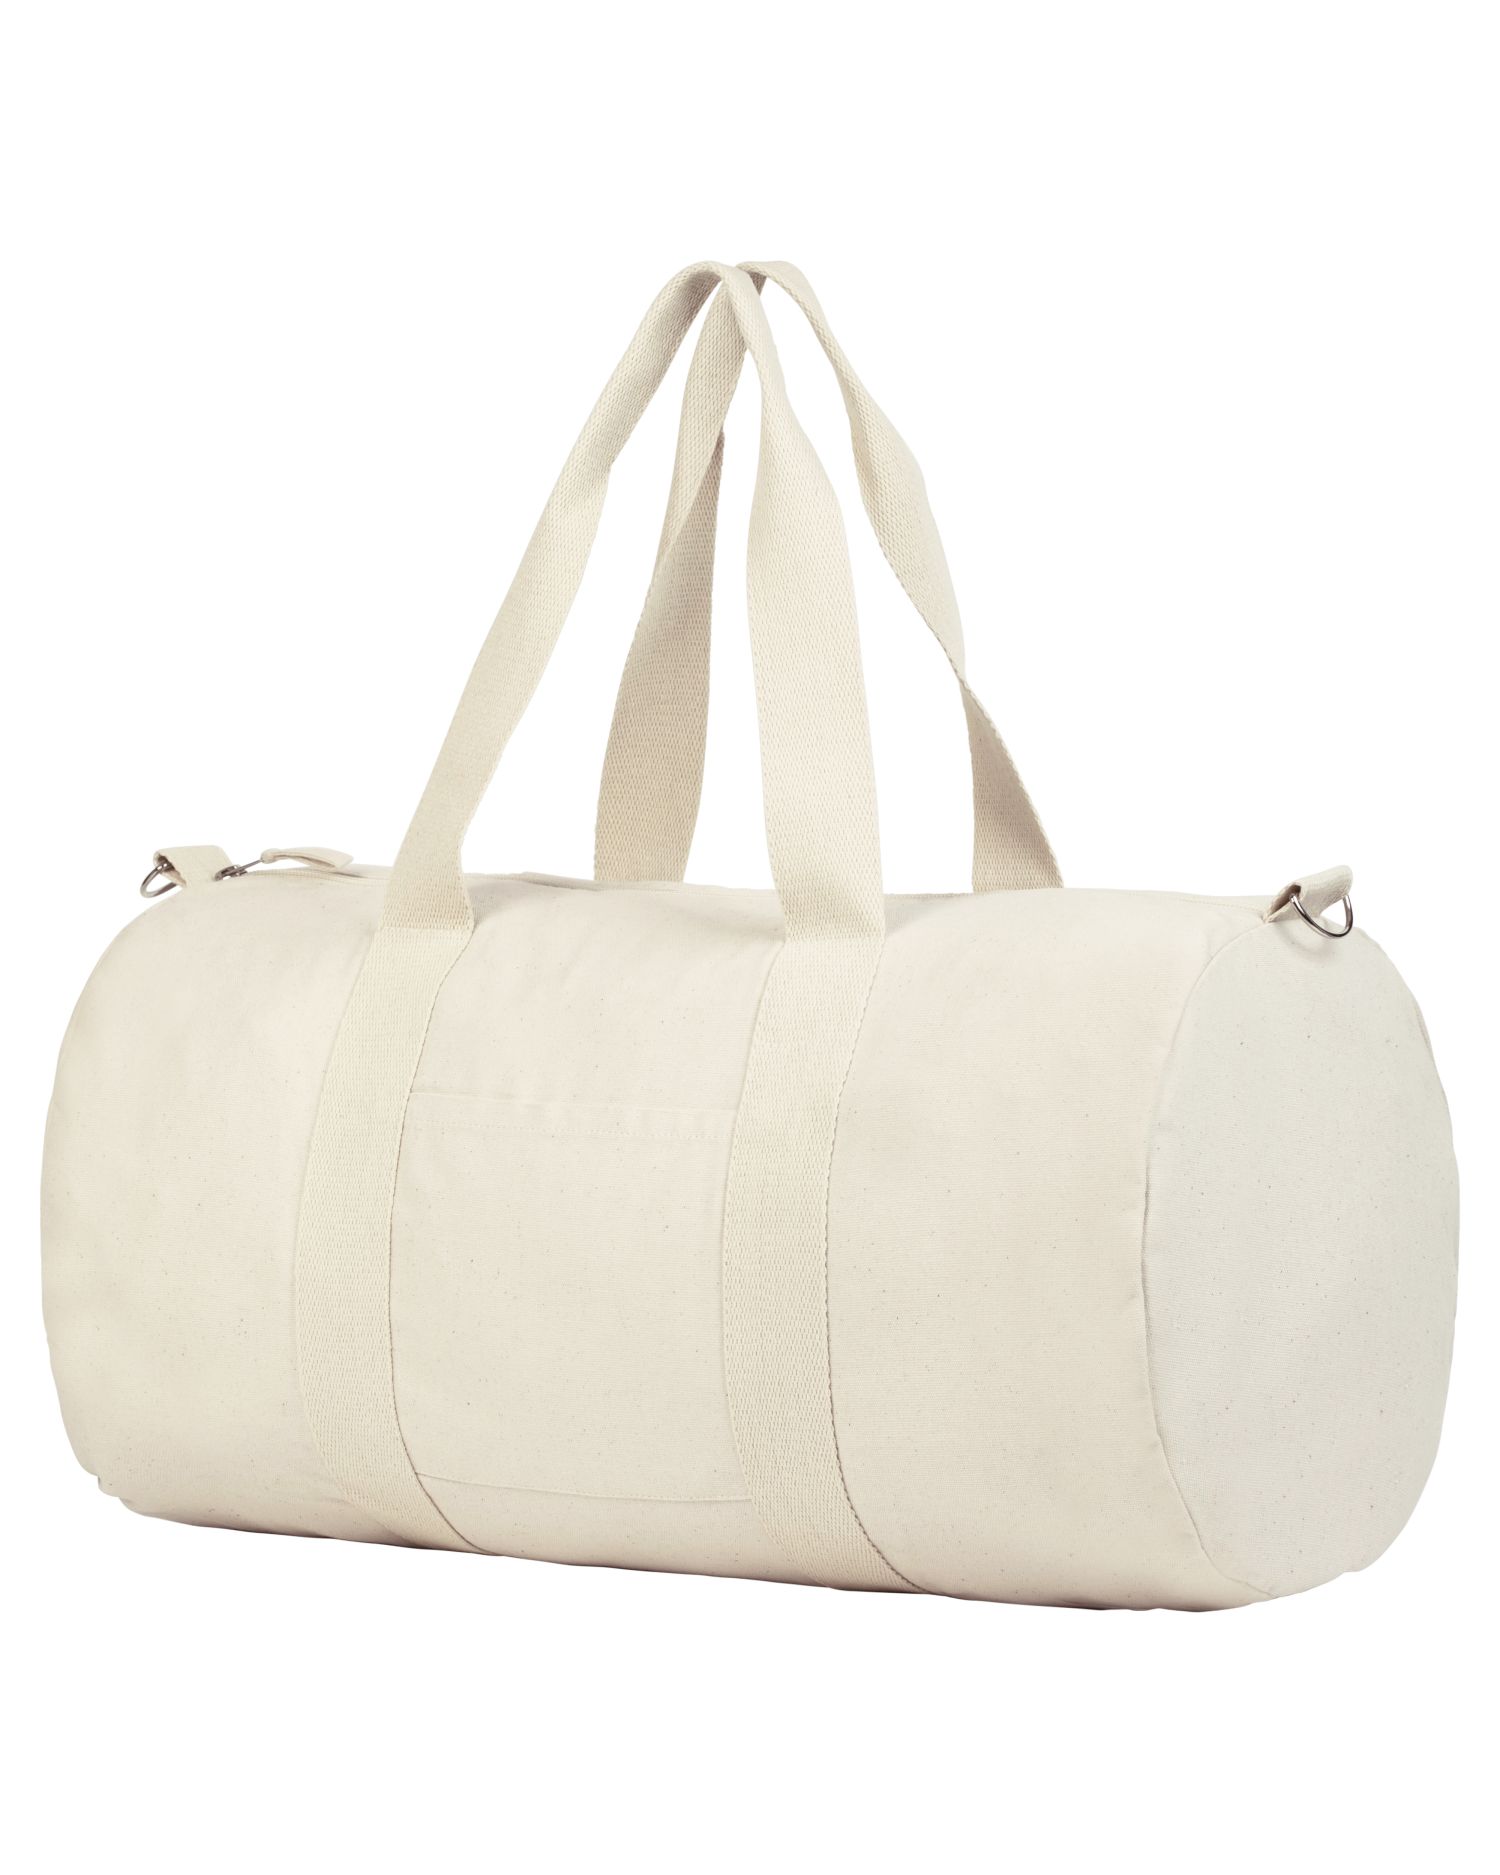 Tasche Duffle Bag in Farbe Natural